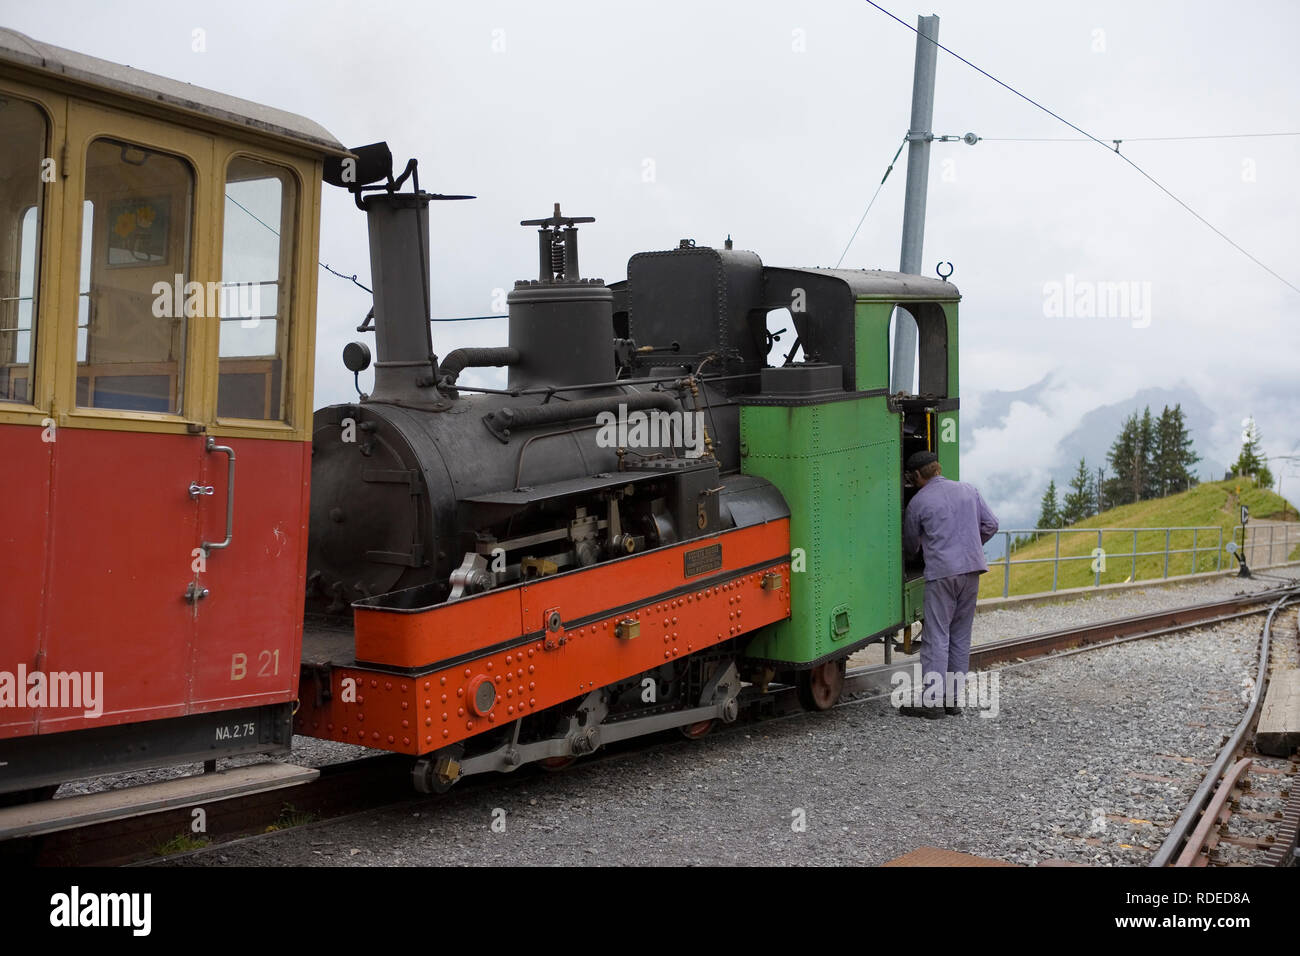 Swiss Locomotive Works High Resolution Stock Photography and Images - Alamy